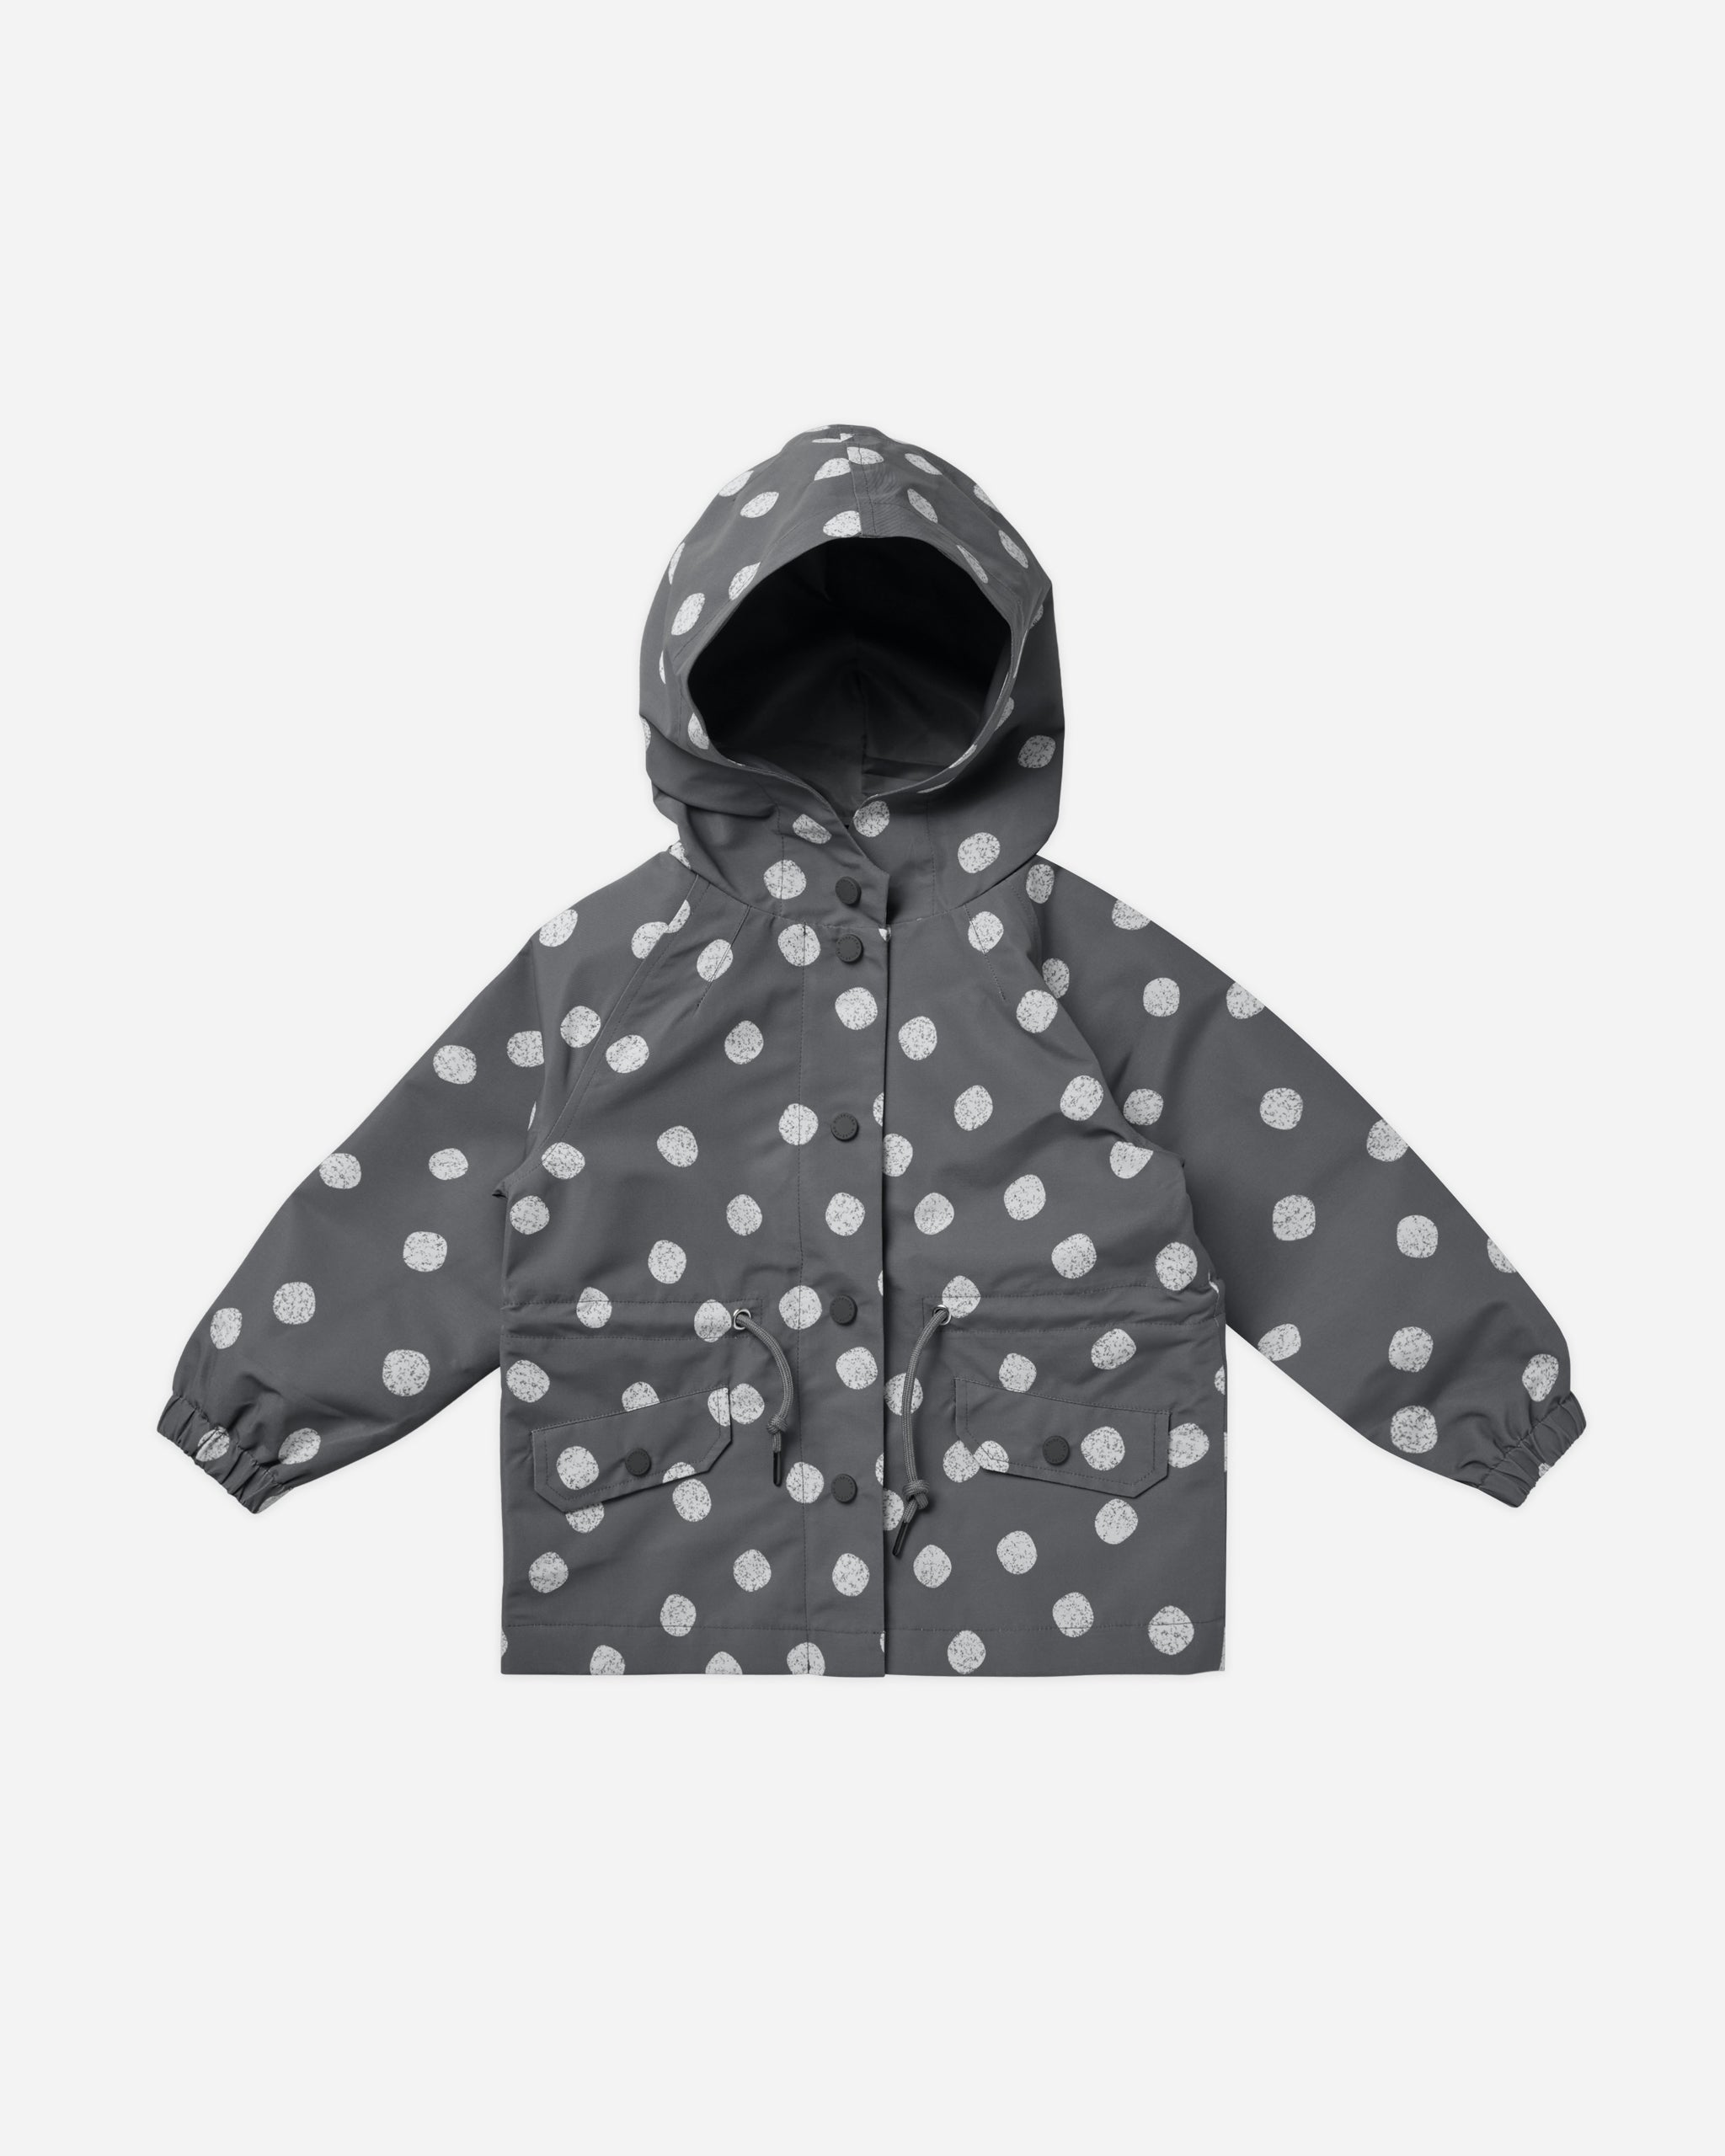 Raincoat || Dotty - Rylee + Cru | Kids Clothes | Trendy Baby Clothes | Modern Infant Outfits |